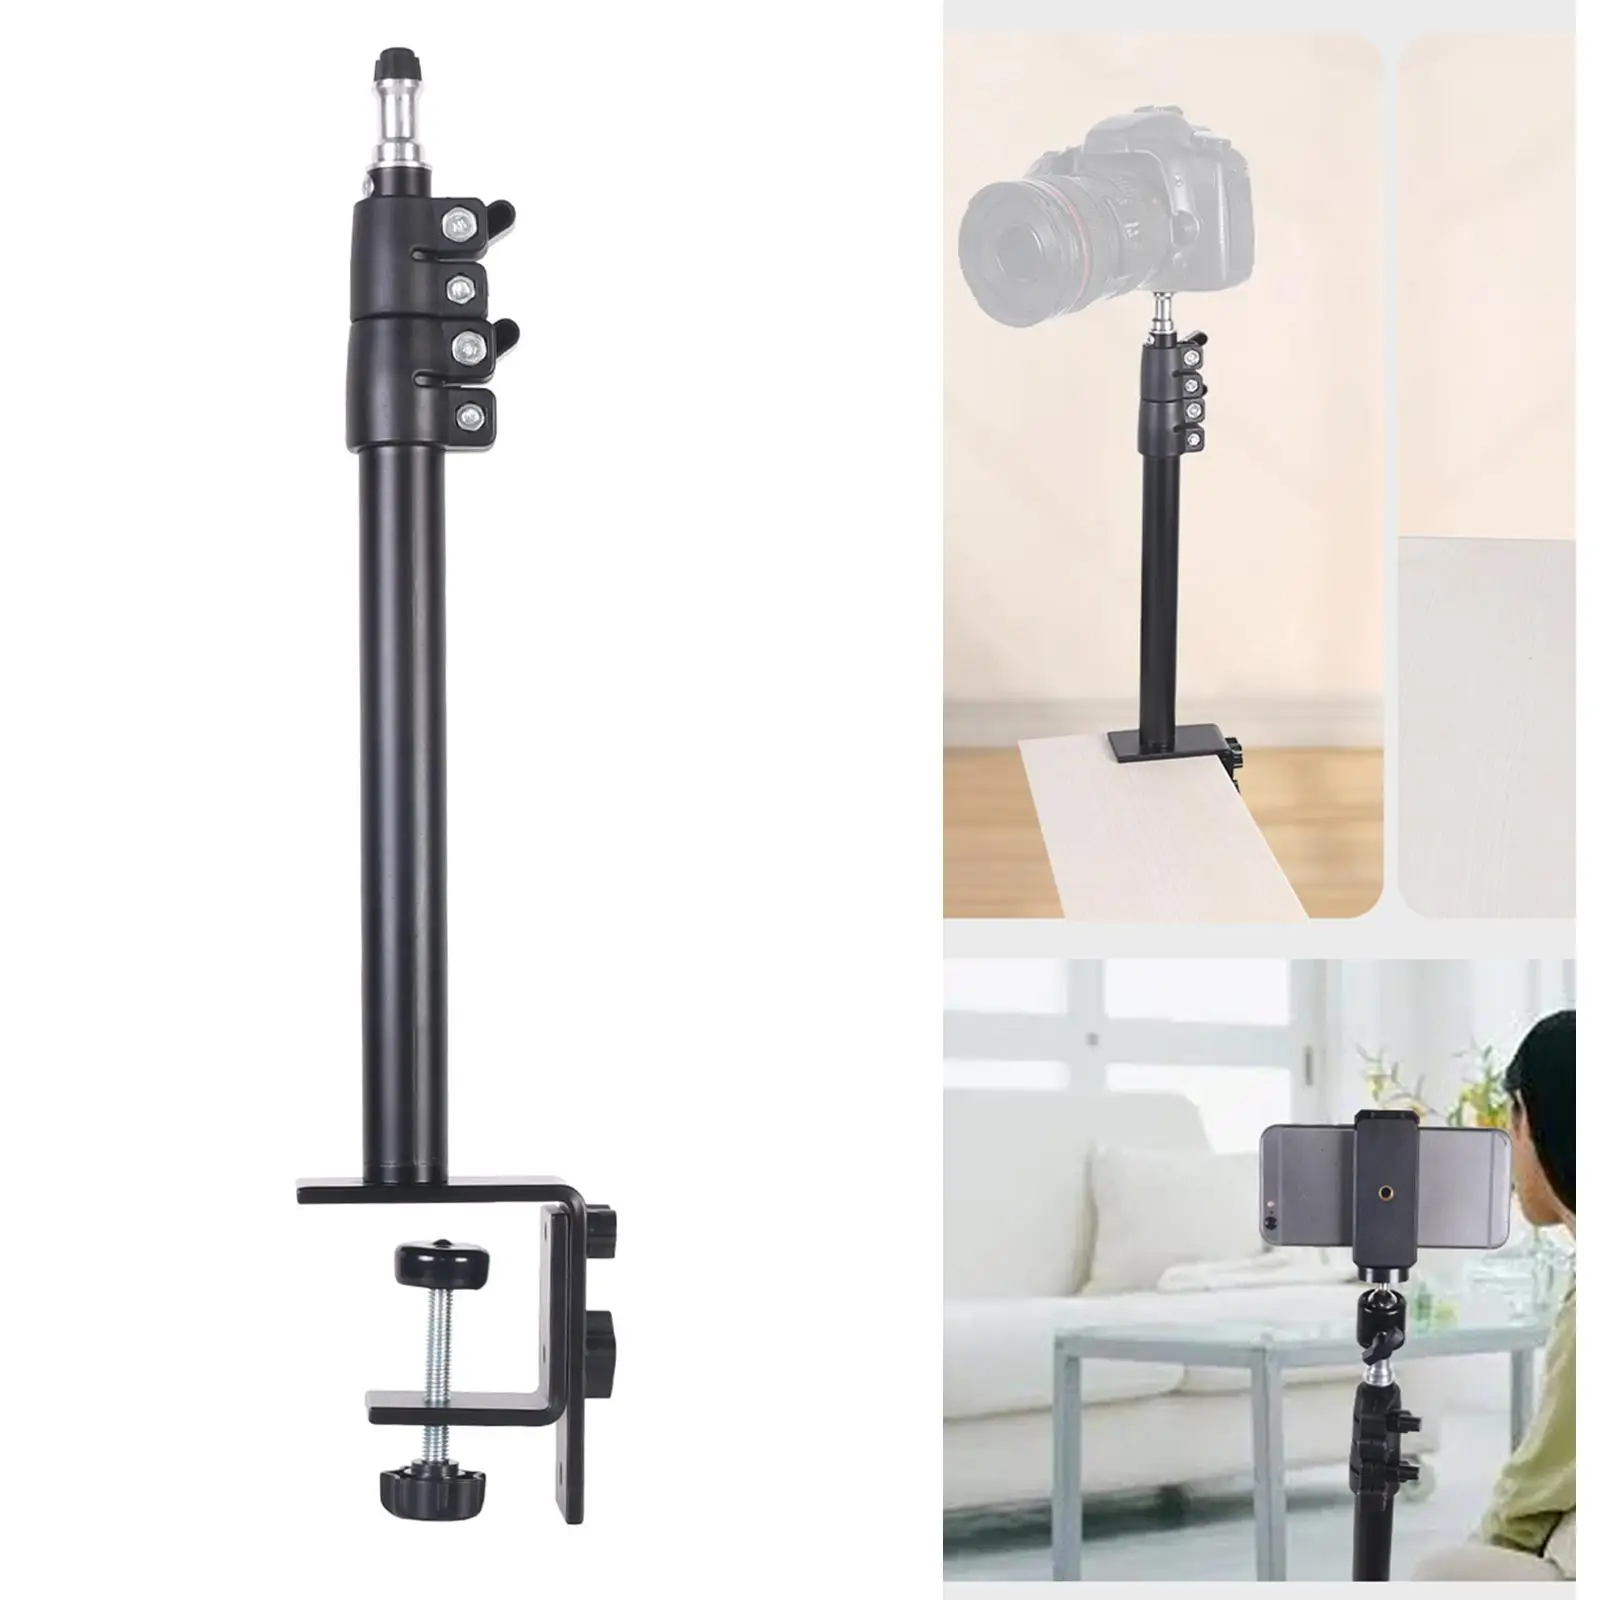 Desk Mount Stand Tabletop L clamp Mounting Adjustable Table Stand Aluminum for DSLR Camera light Panel Light Mic